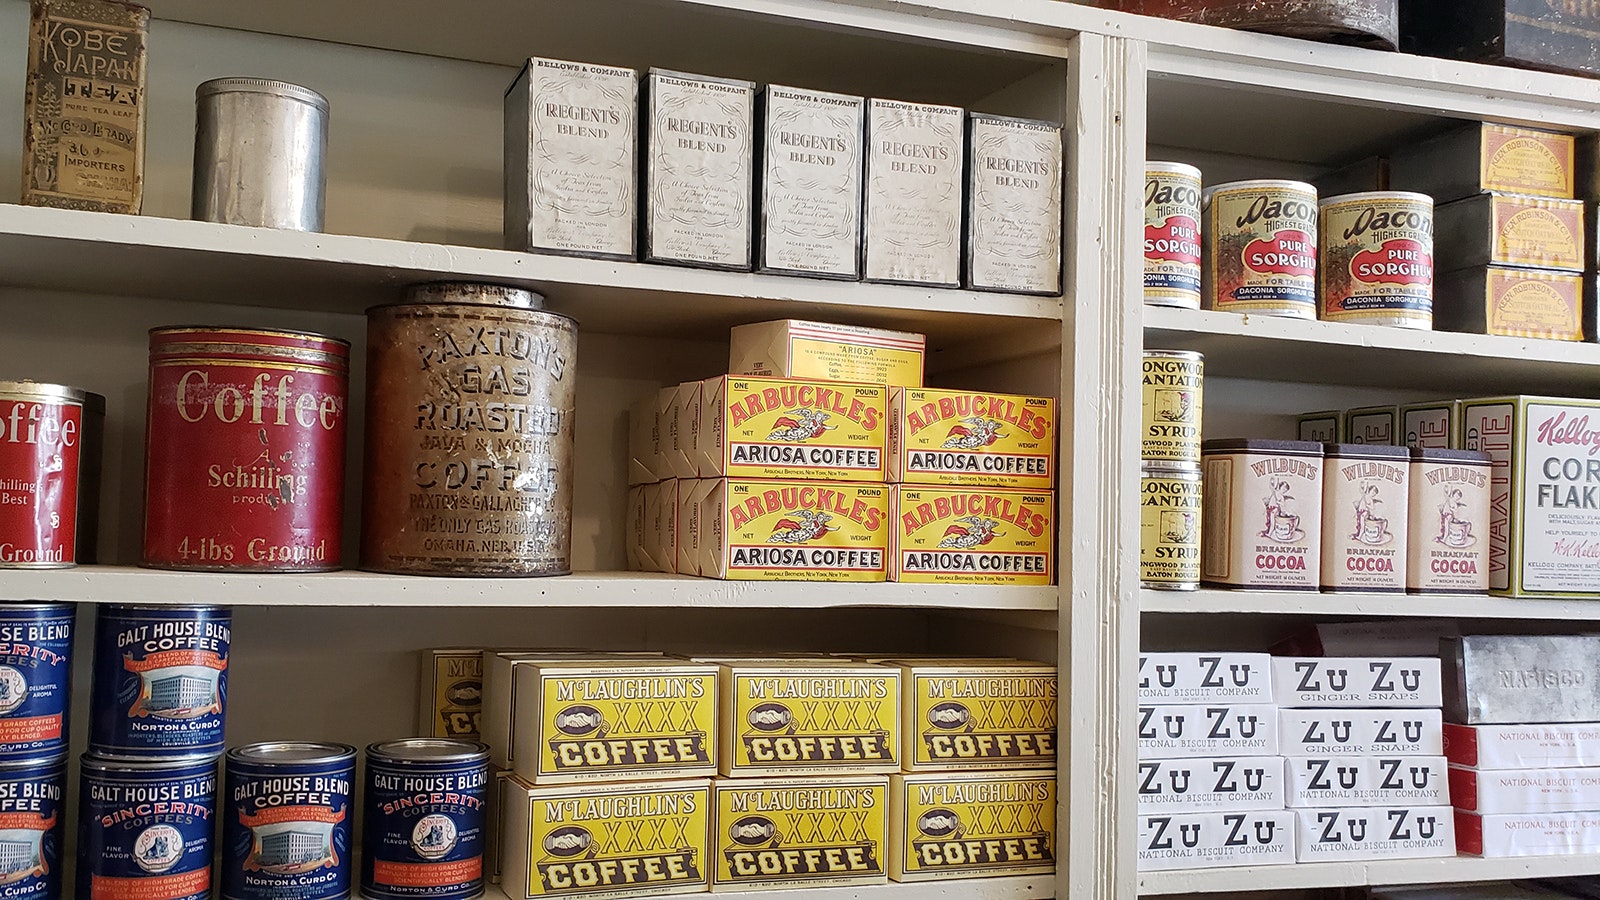 Historians have found labels of the era and reprinted them to wrap around cans and boxes to give the mercantile a correct vintage look.